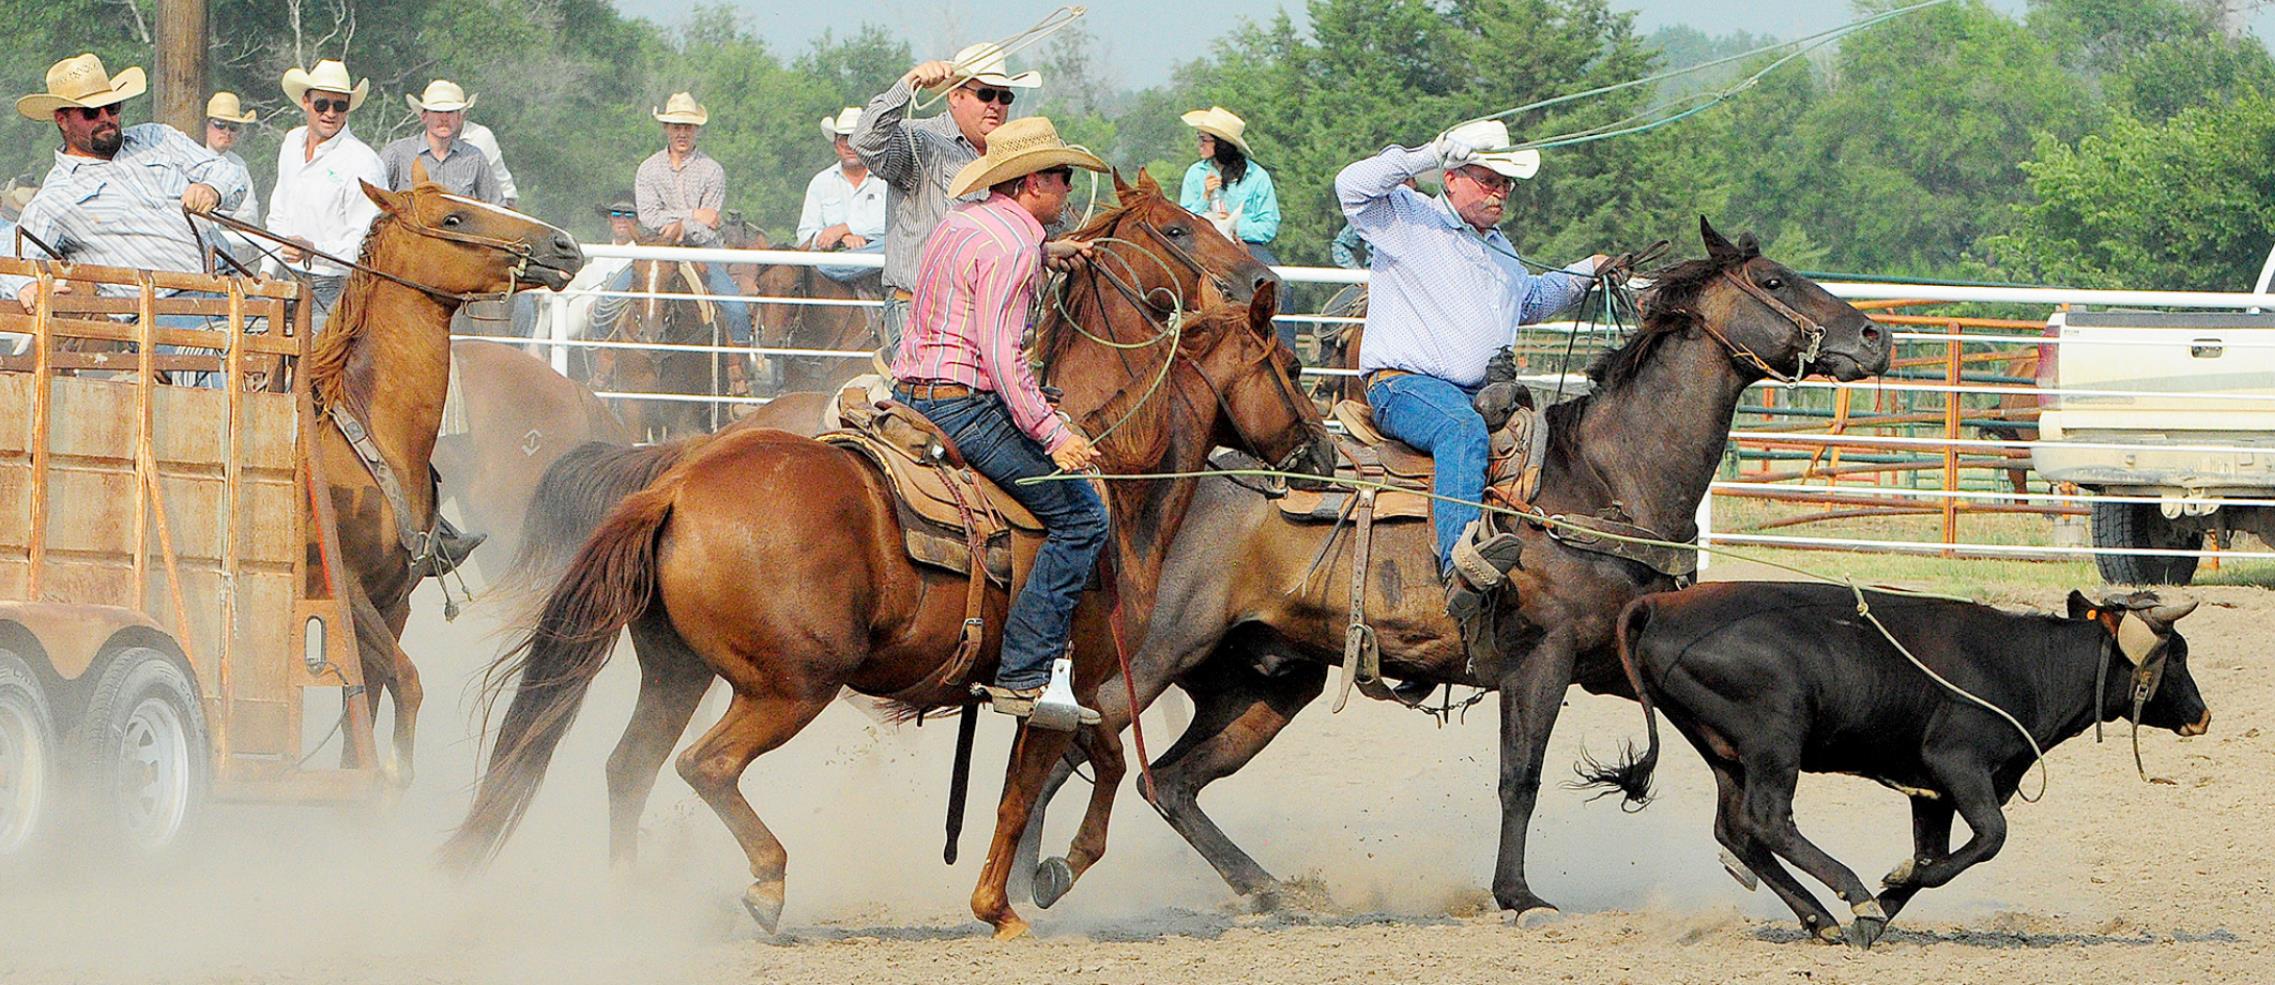 The Ranch Rodeo kicks off the Rooks County Free Fair with Dirty Dan and